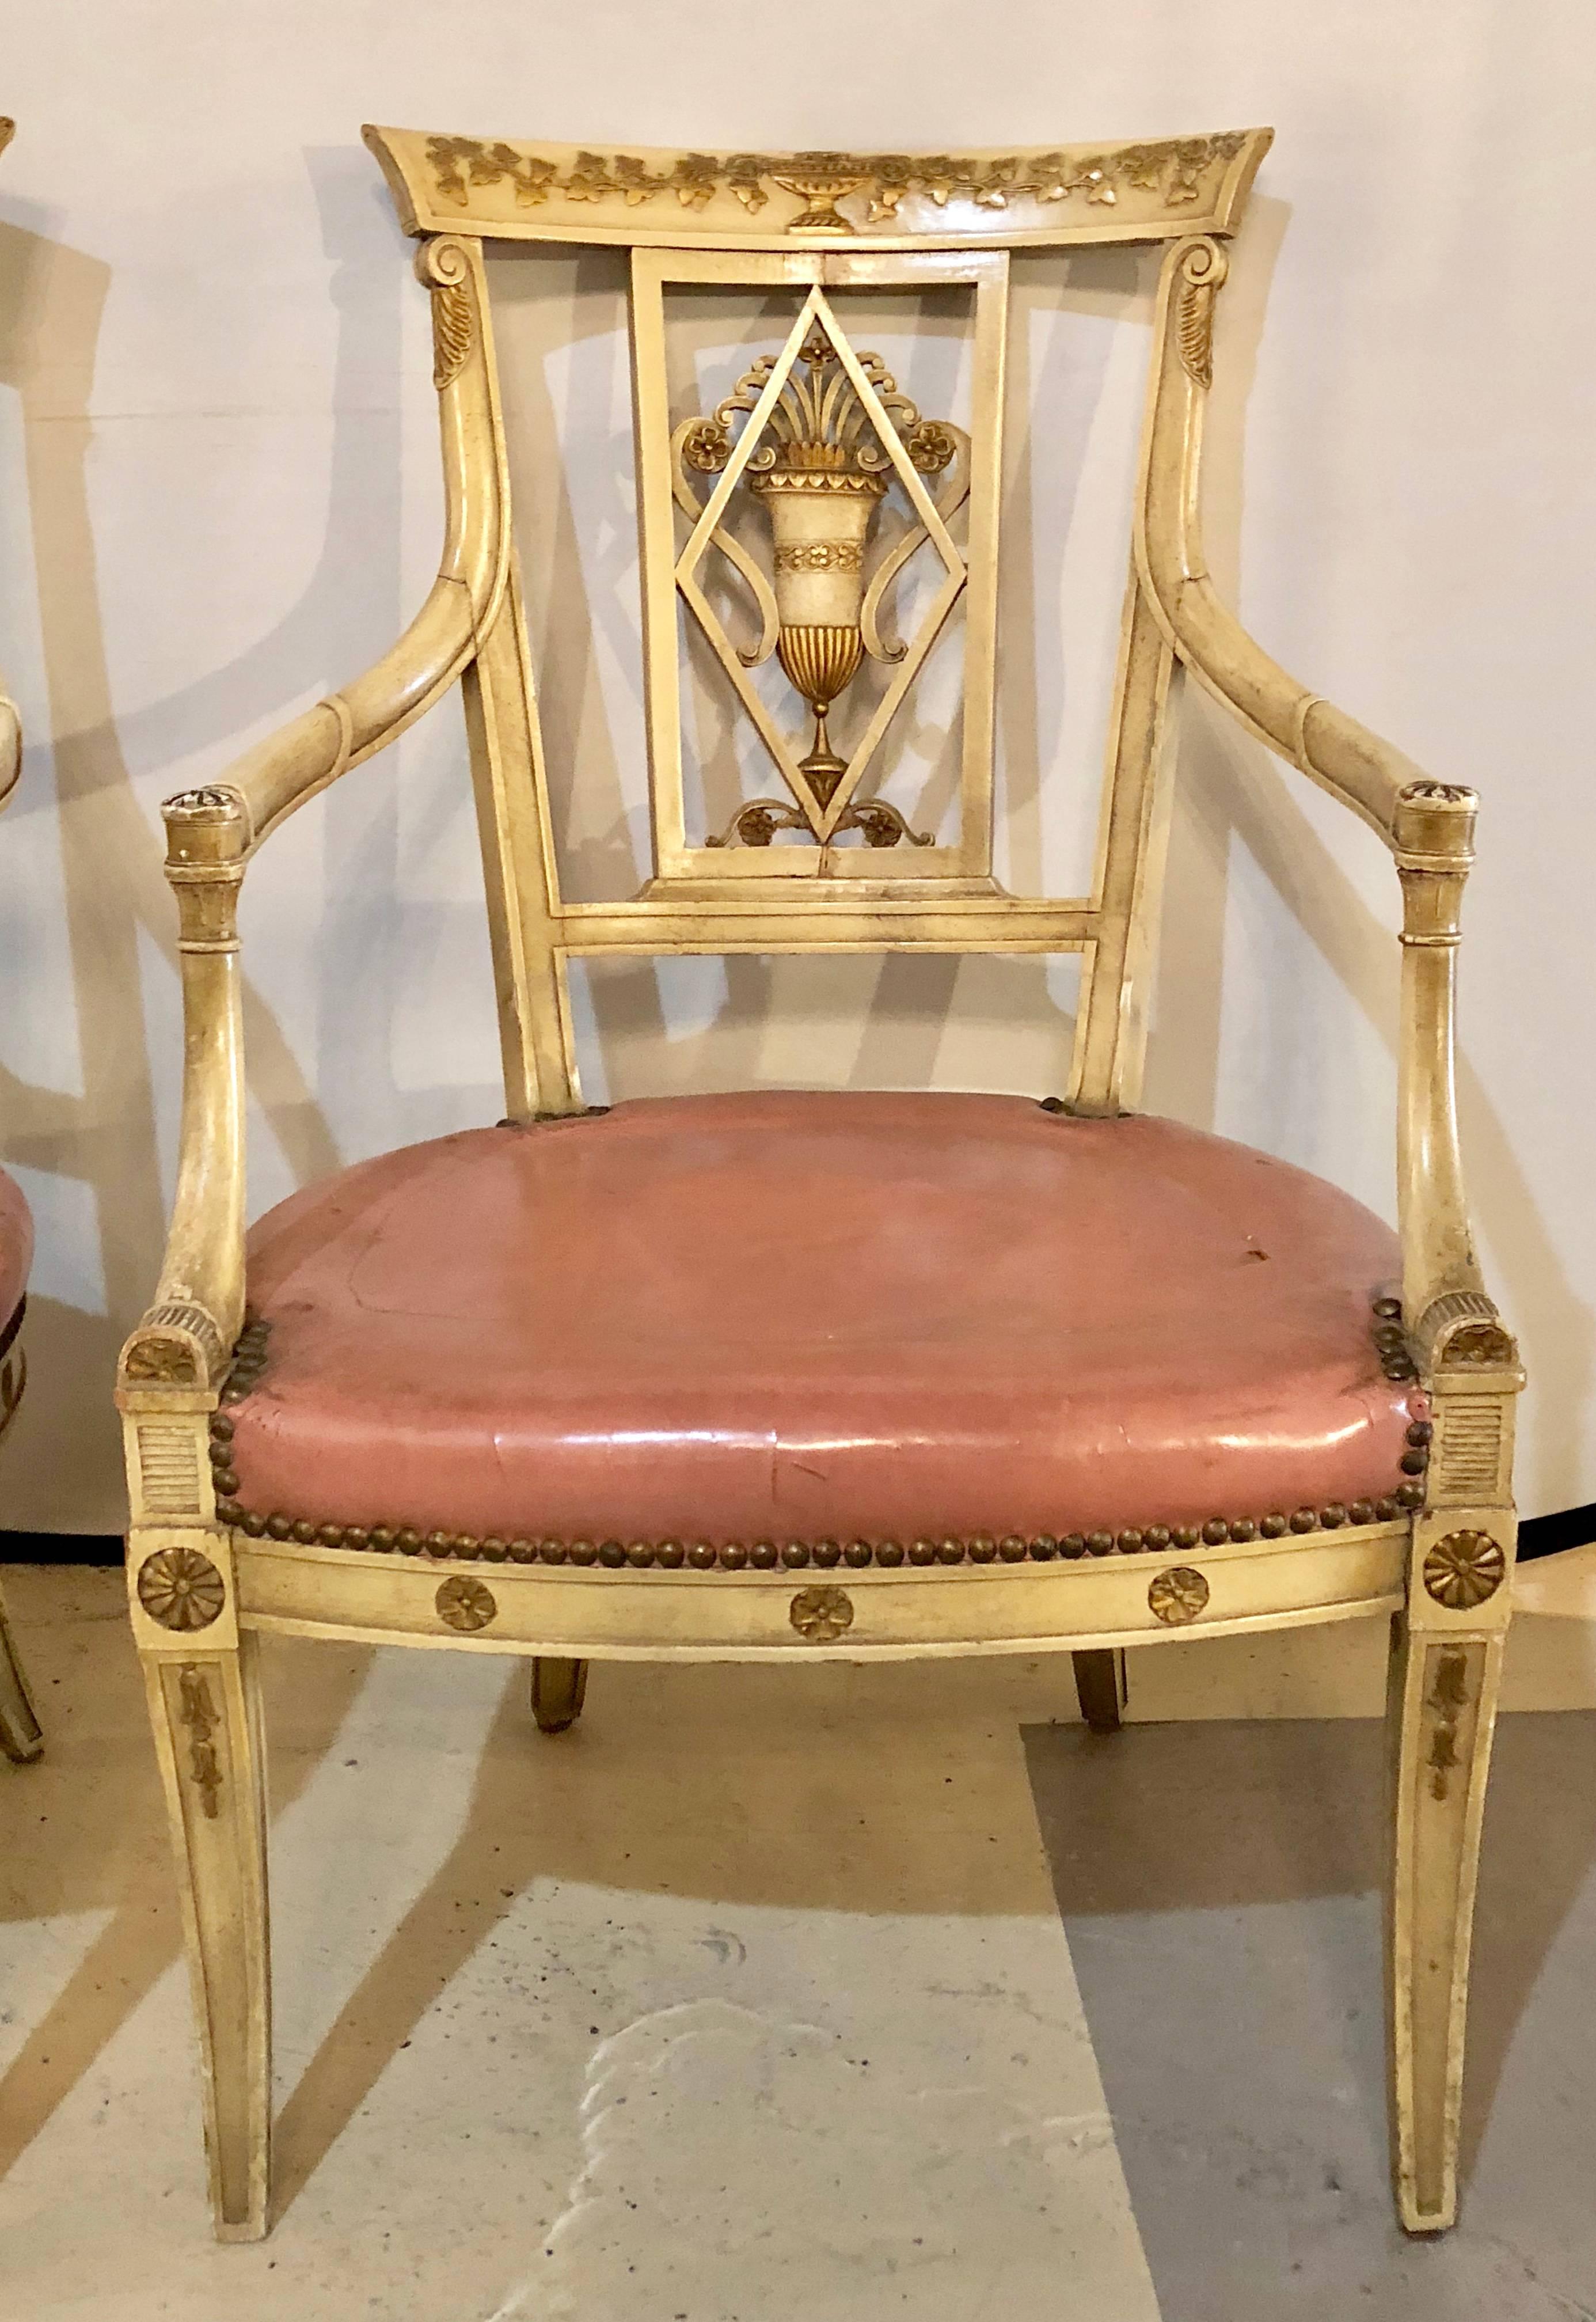 A pair of neoclassical style Maison Jansen armchairs or fauteuils. Part of an original set of twelve documented dining chairs this fine pair of Fauteuils are simply the finest in quality by this iconic designer. The warm worn whitish finish with